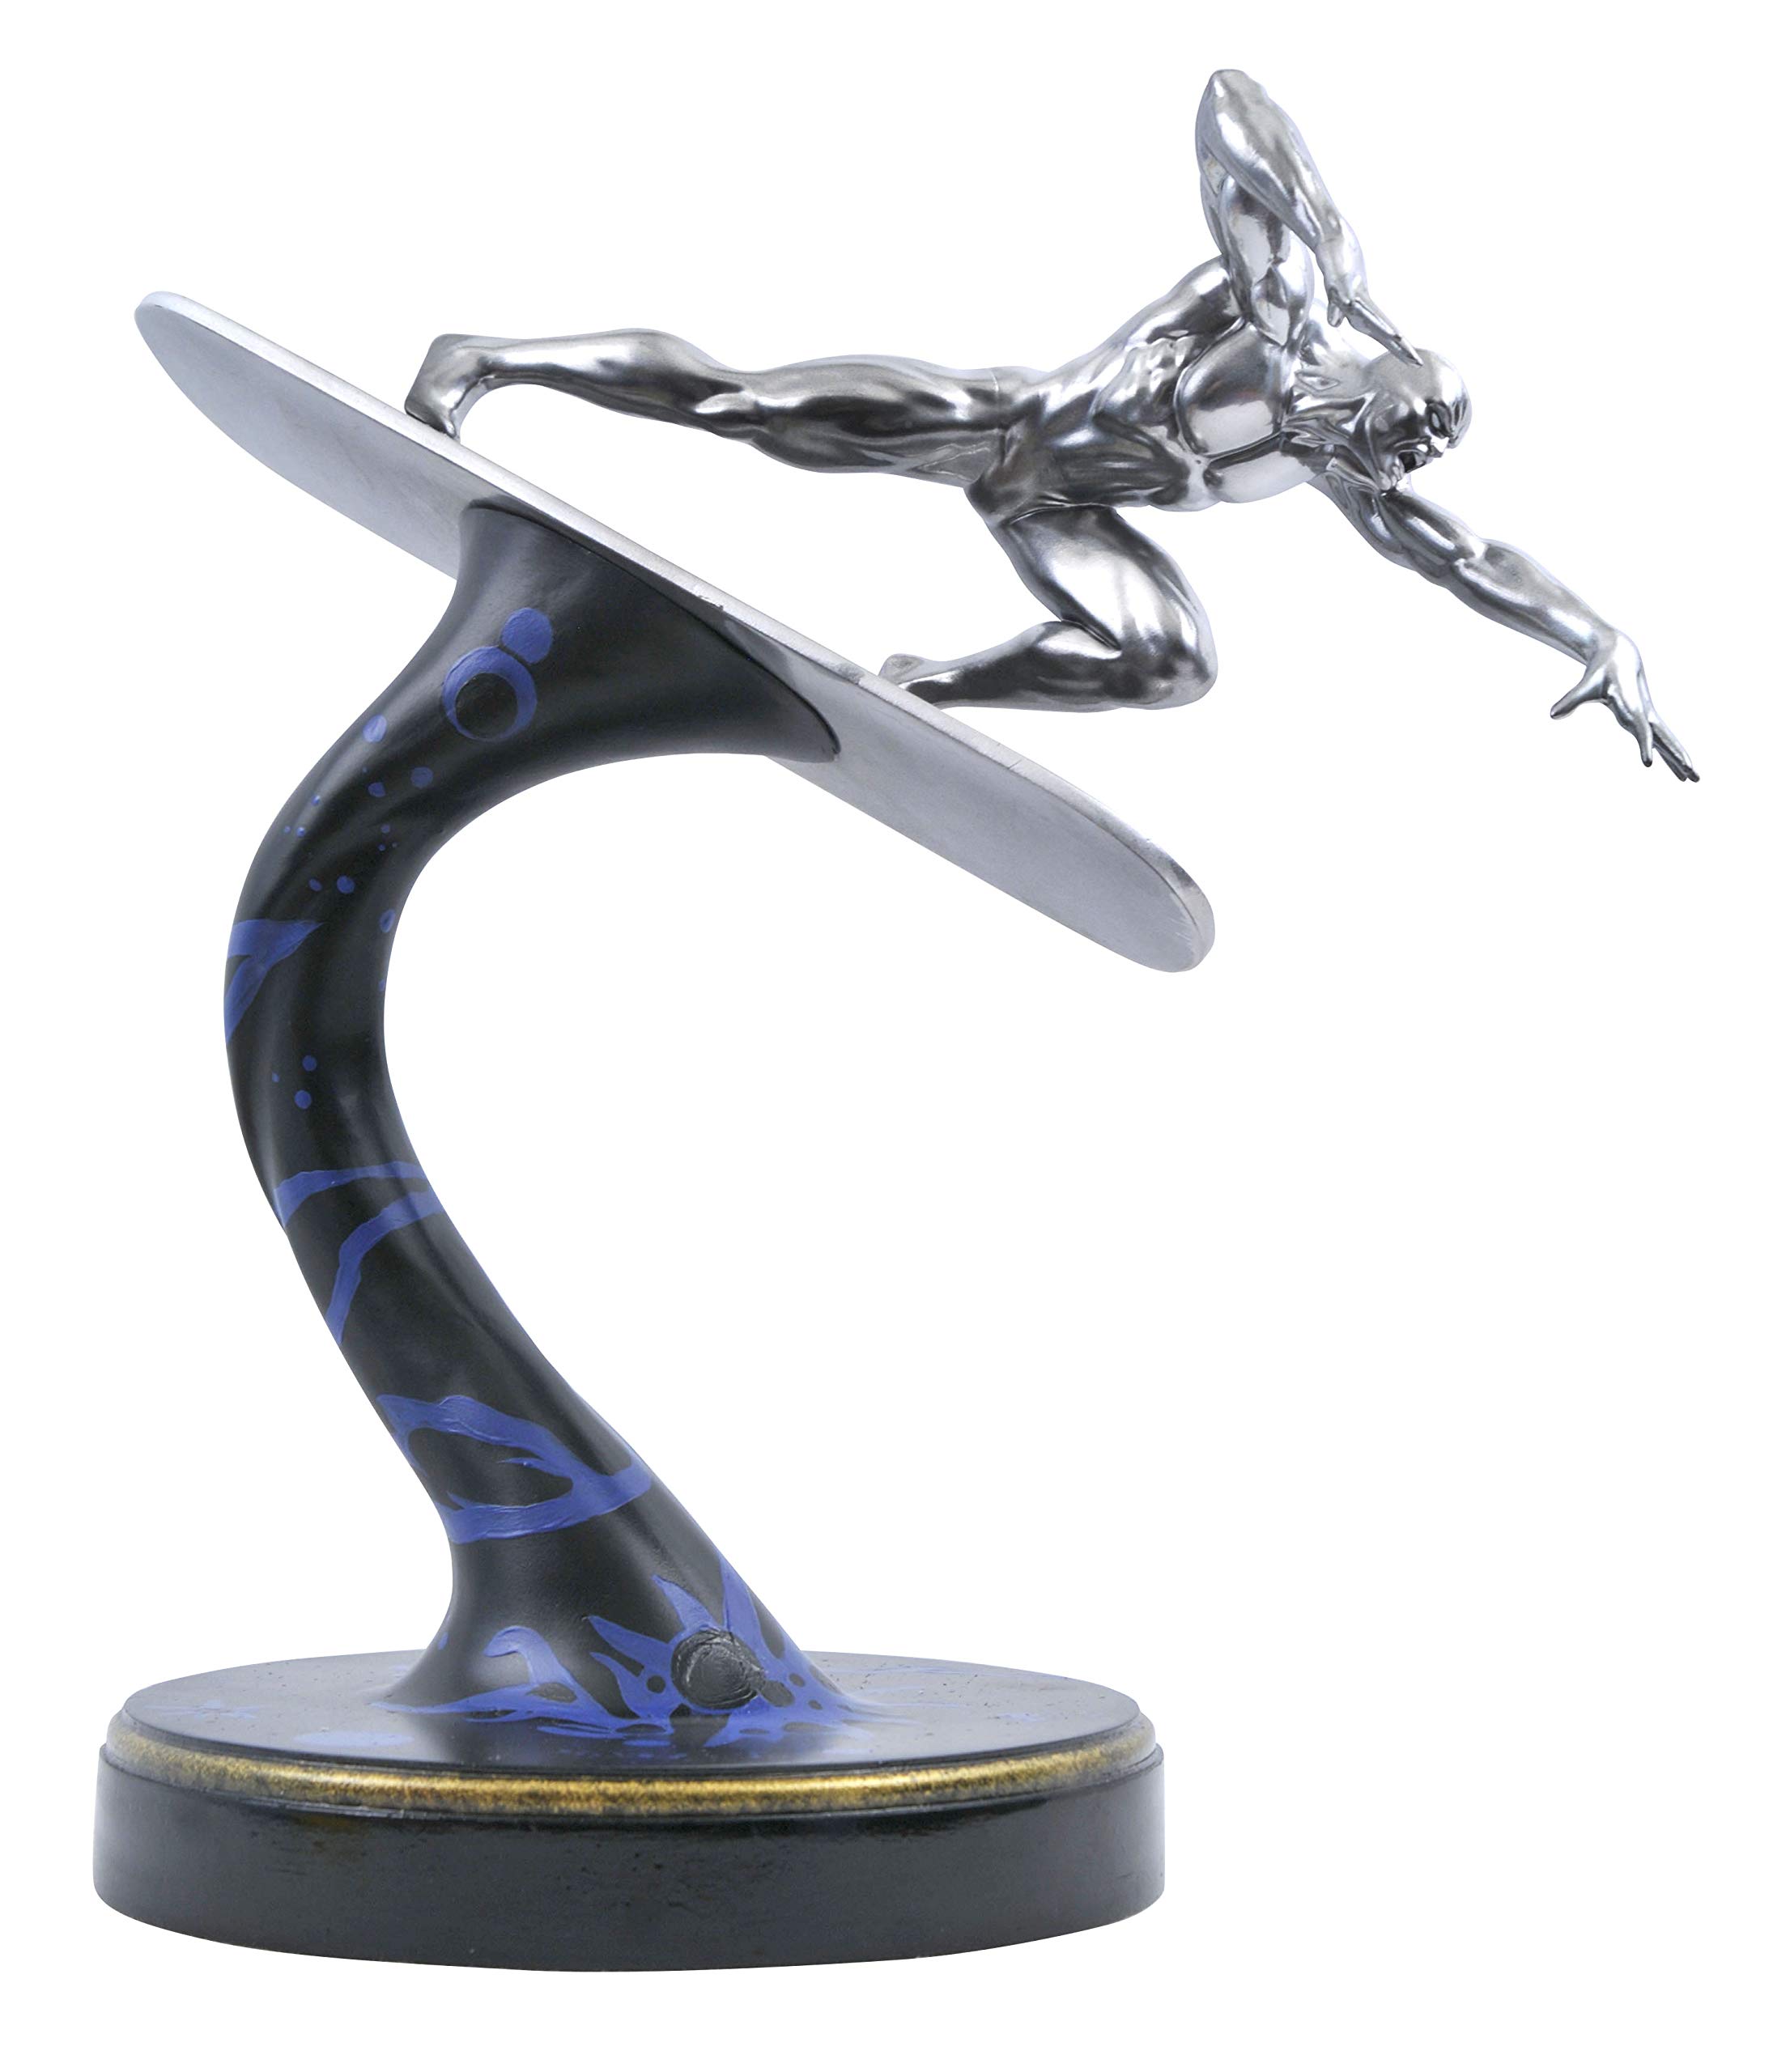 DIAMOND SELECT TOYS Marvel Premier Collection: Silver Surfer Statue, Multicolor, 12 inches